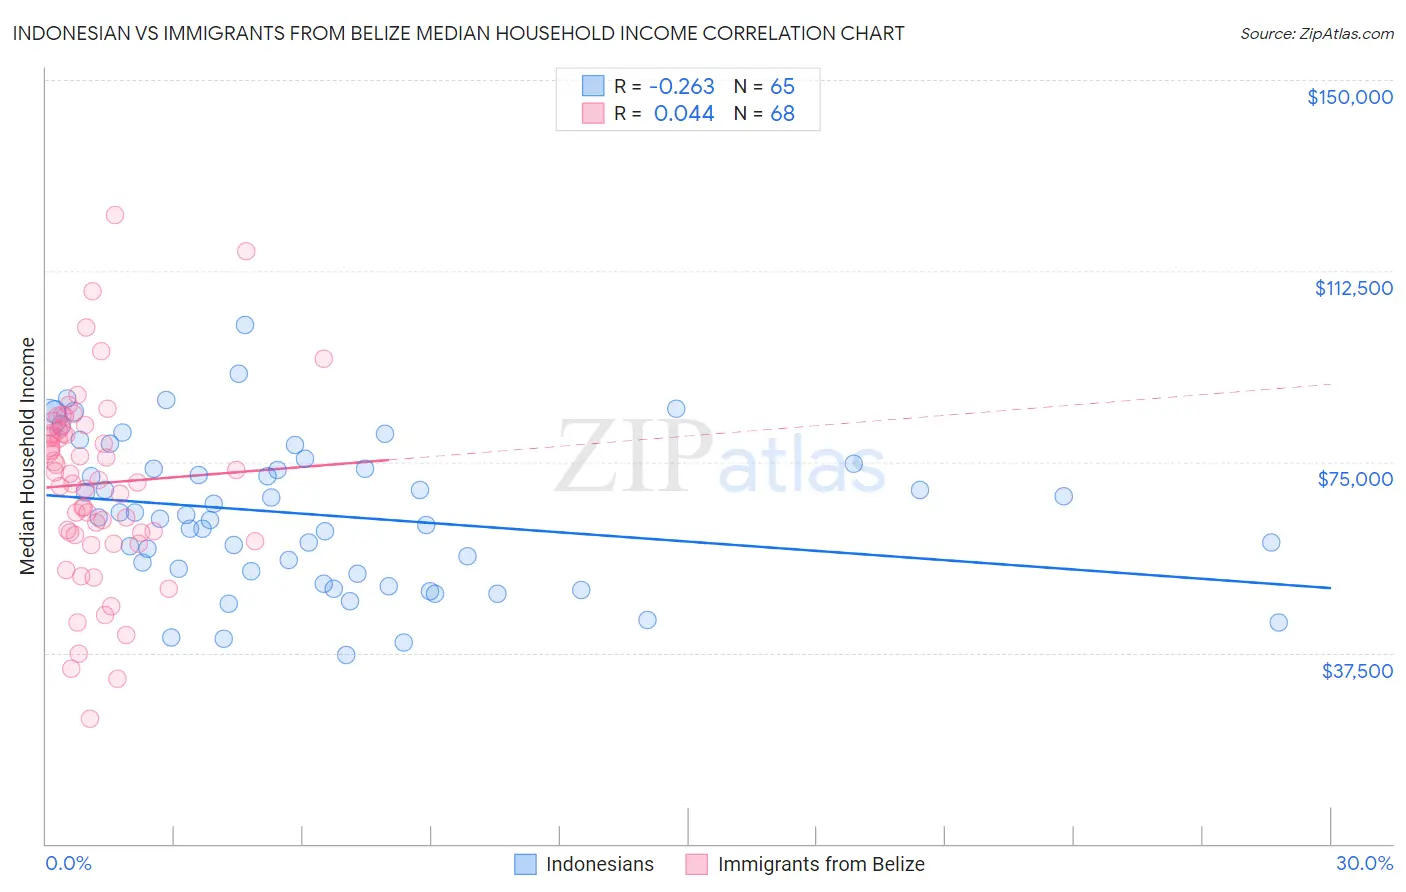 Indonesian vs Immigrants from Belize Median Household Income